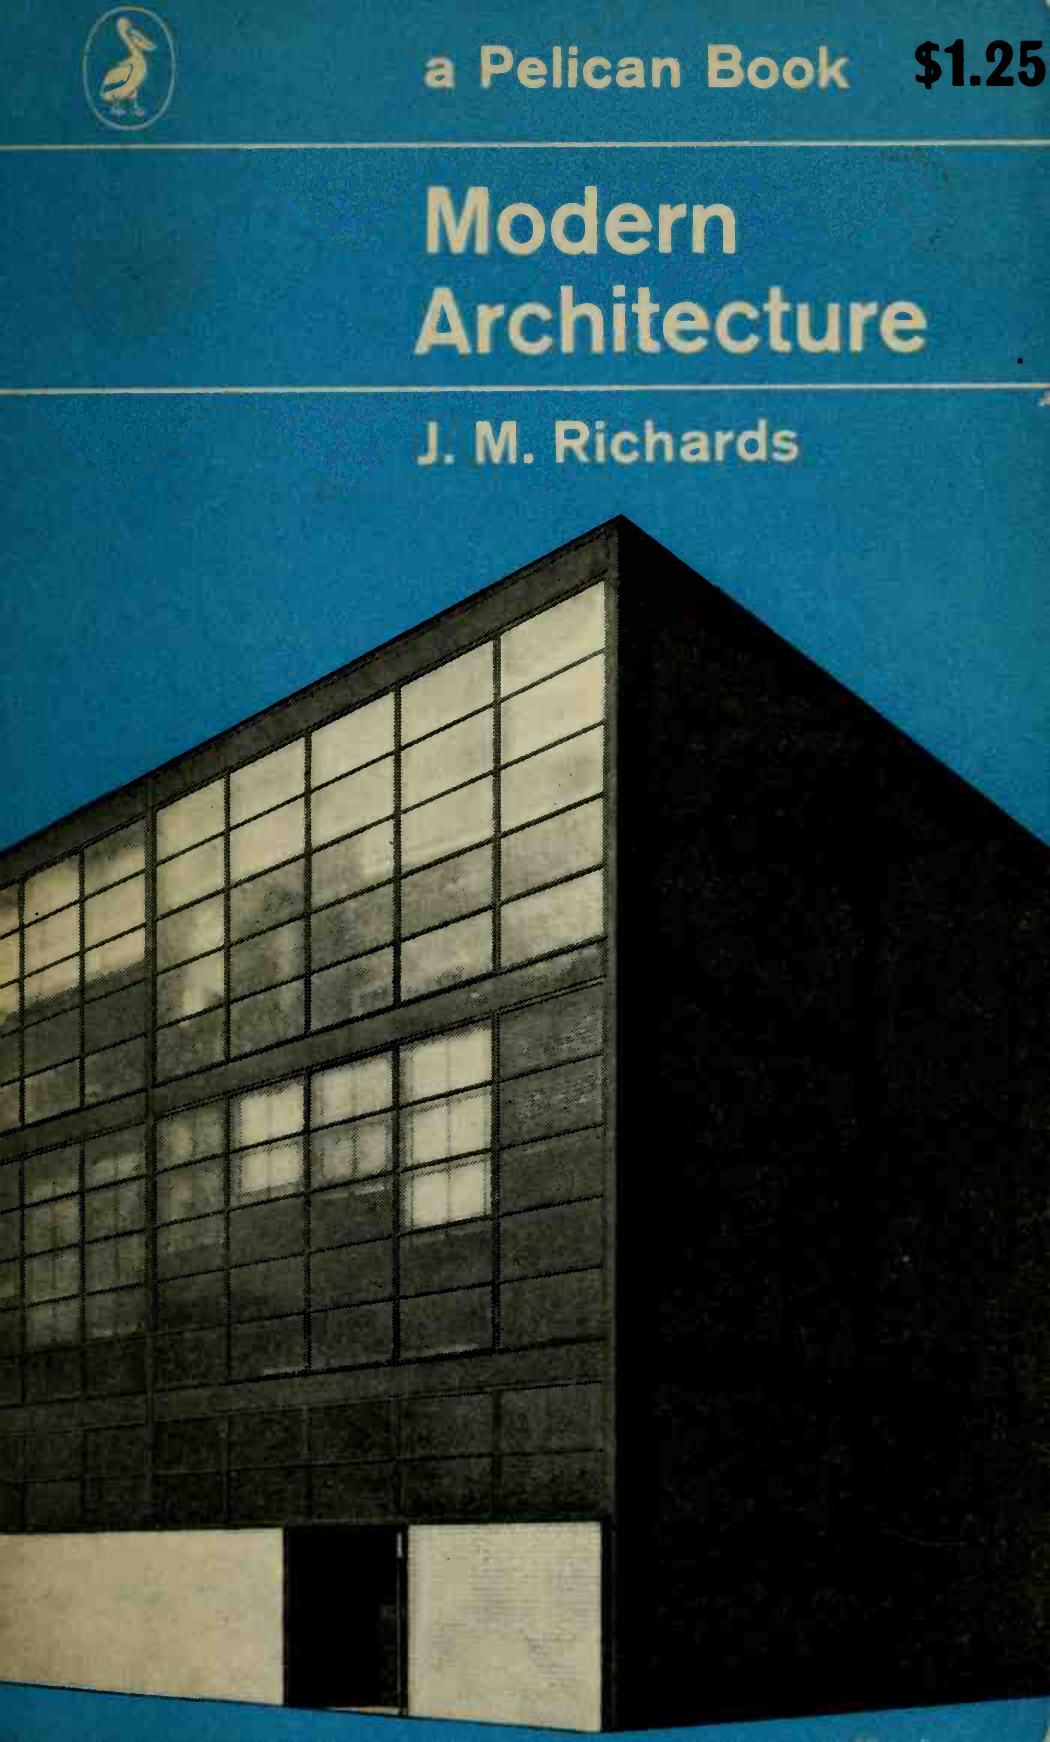 An introduction to modern architecture / J. M. Richards. — Revised edition. — Baltimore, Maryland : Penguin Books, 1962